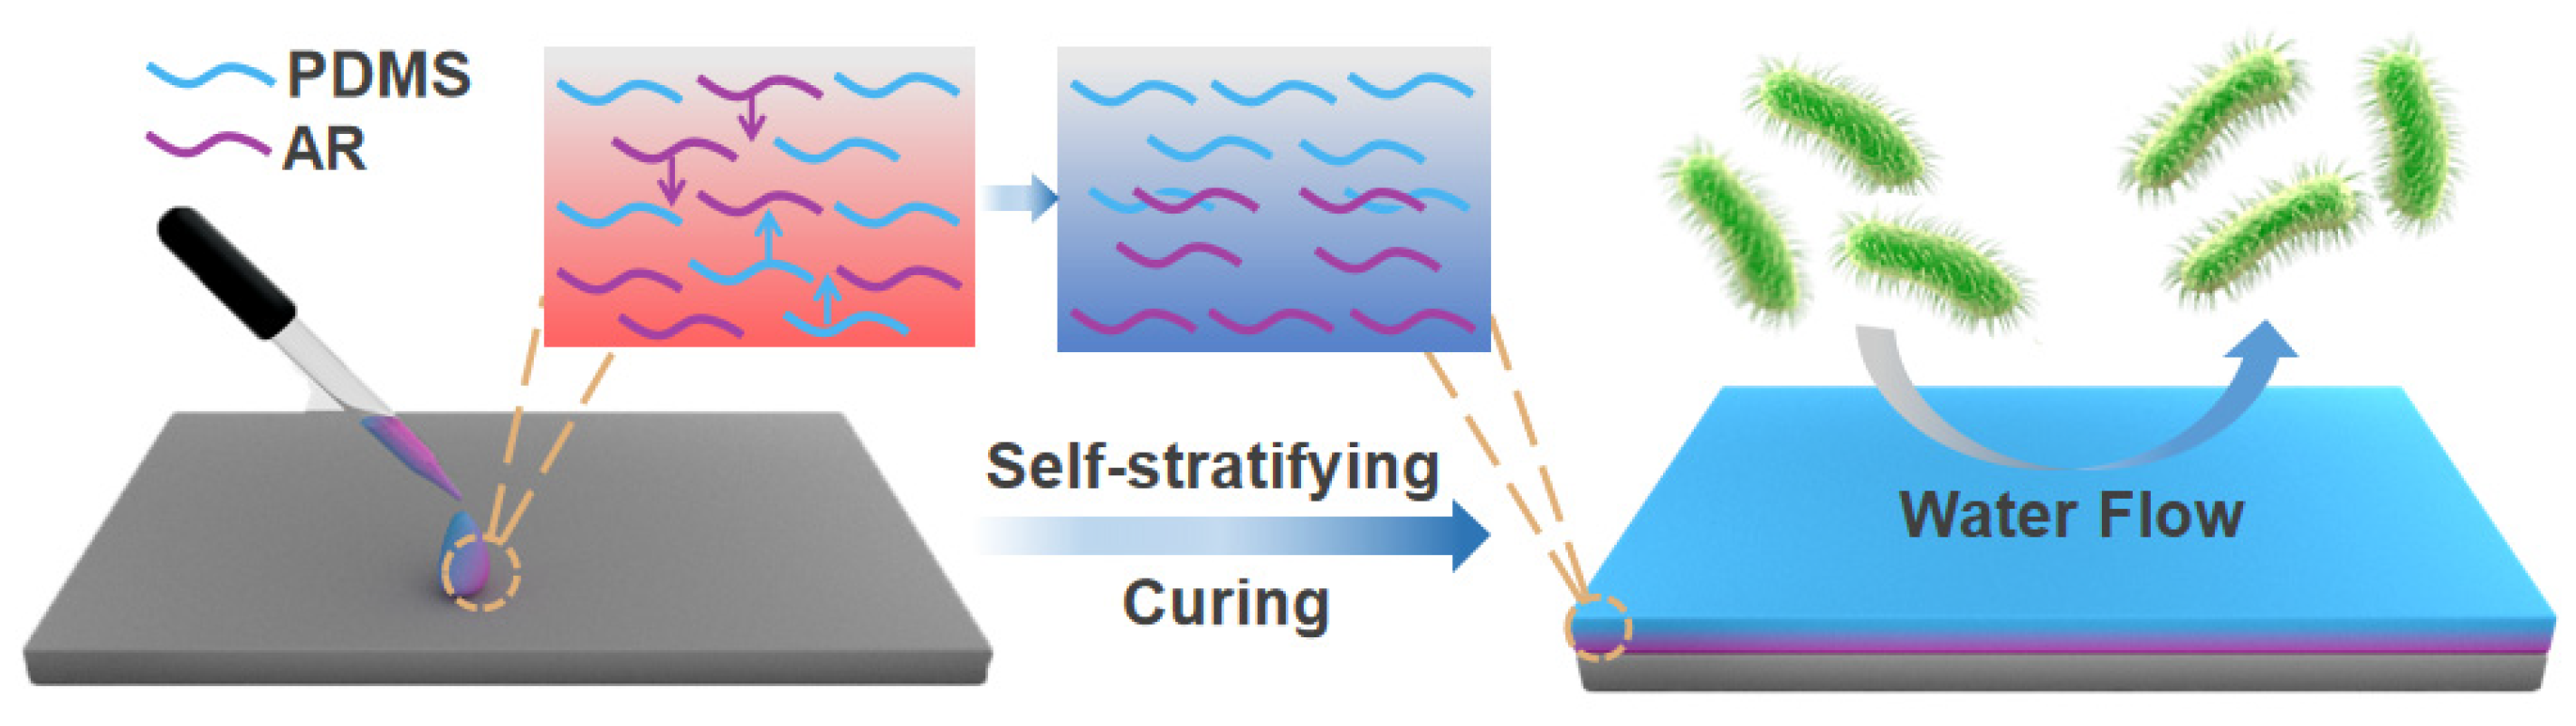 Silicone-Based Fouling-Release Coatings for Marine Antifouling